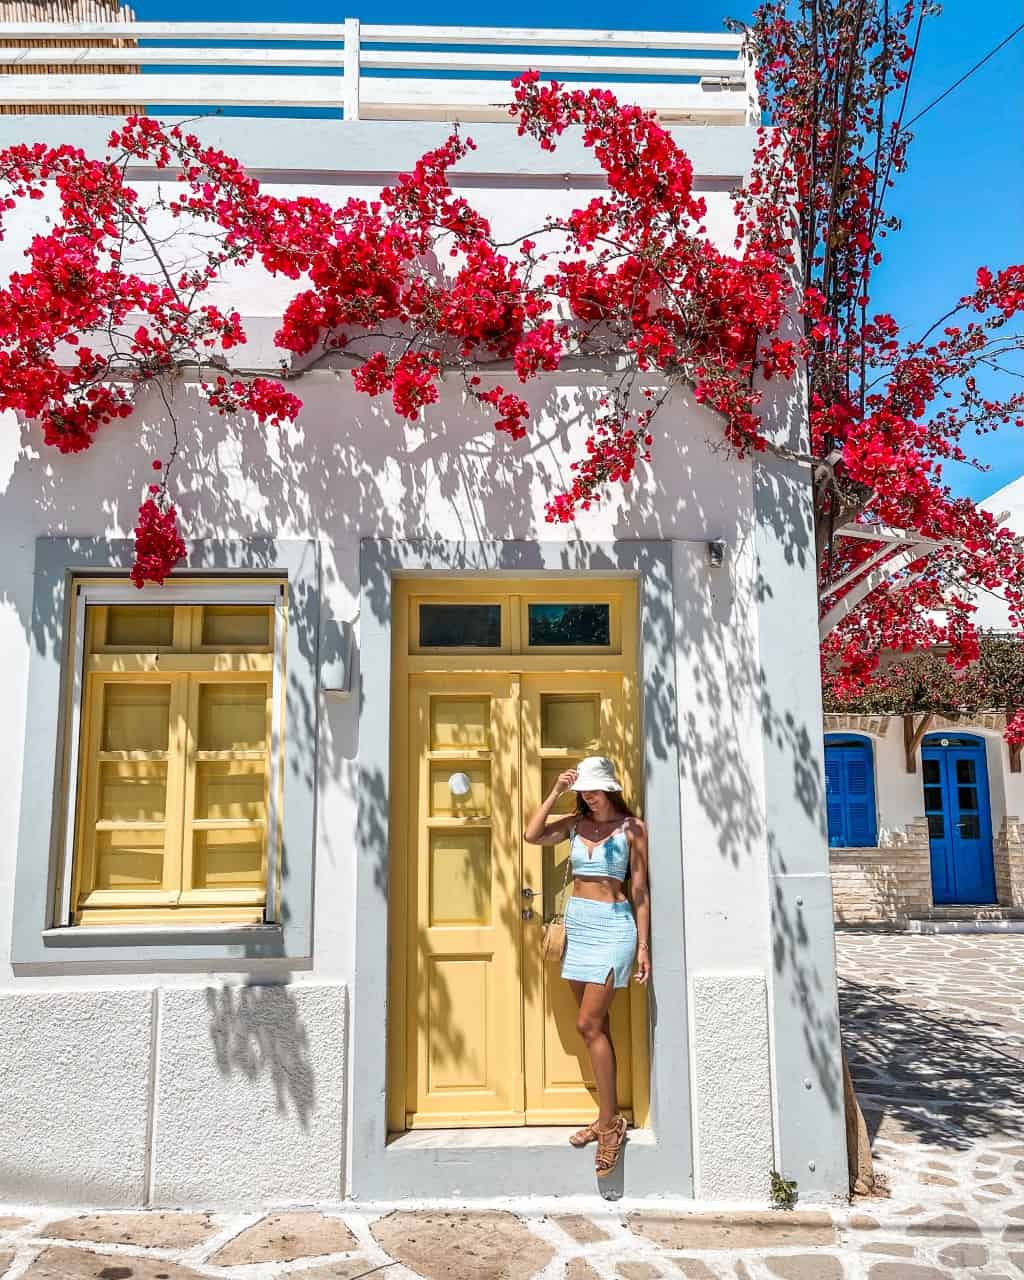 A photo of me posing in front of a yellow door next to a yellow window of a building framed by vibrant bougainvillea flowers.